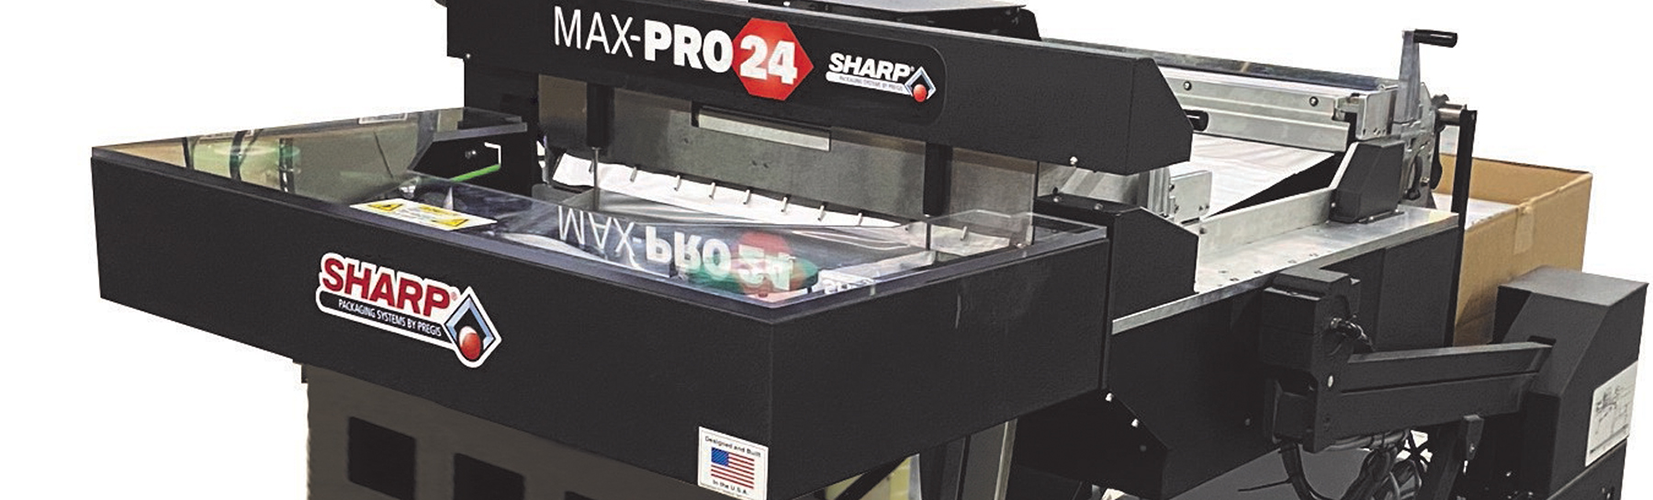 MAX-PRO 24 Polyverpackungssystem